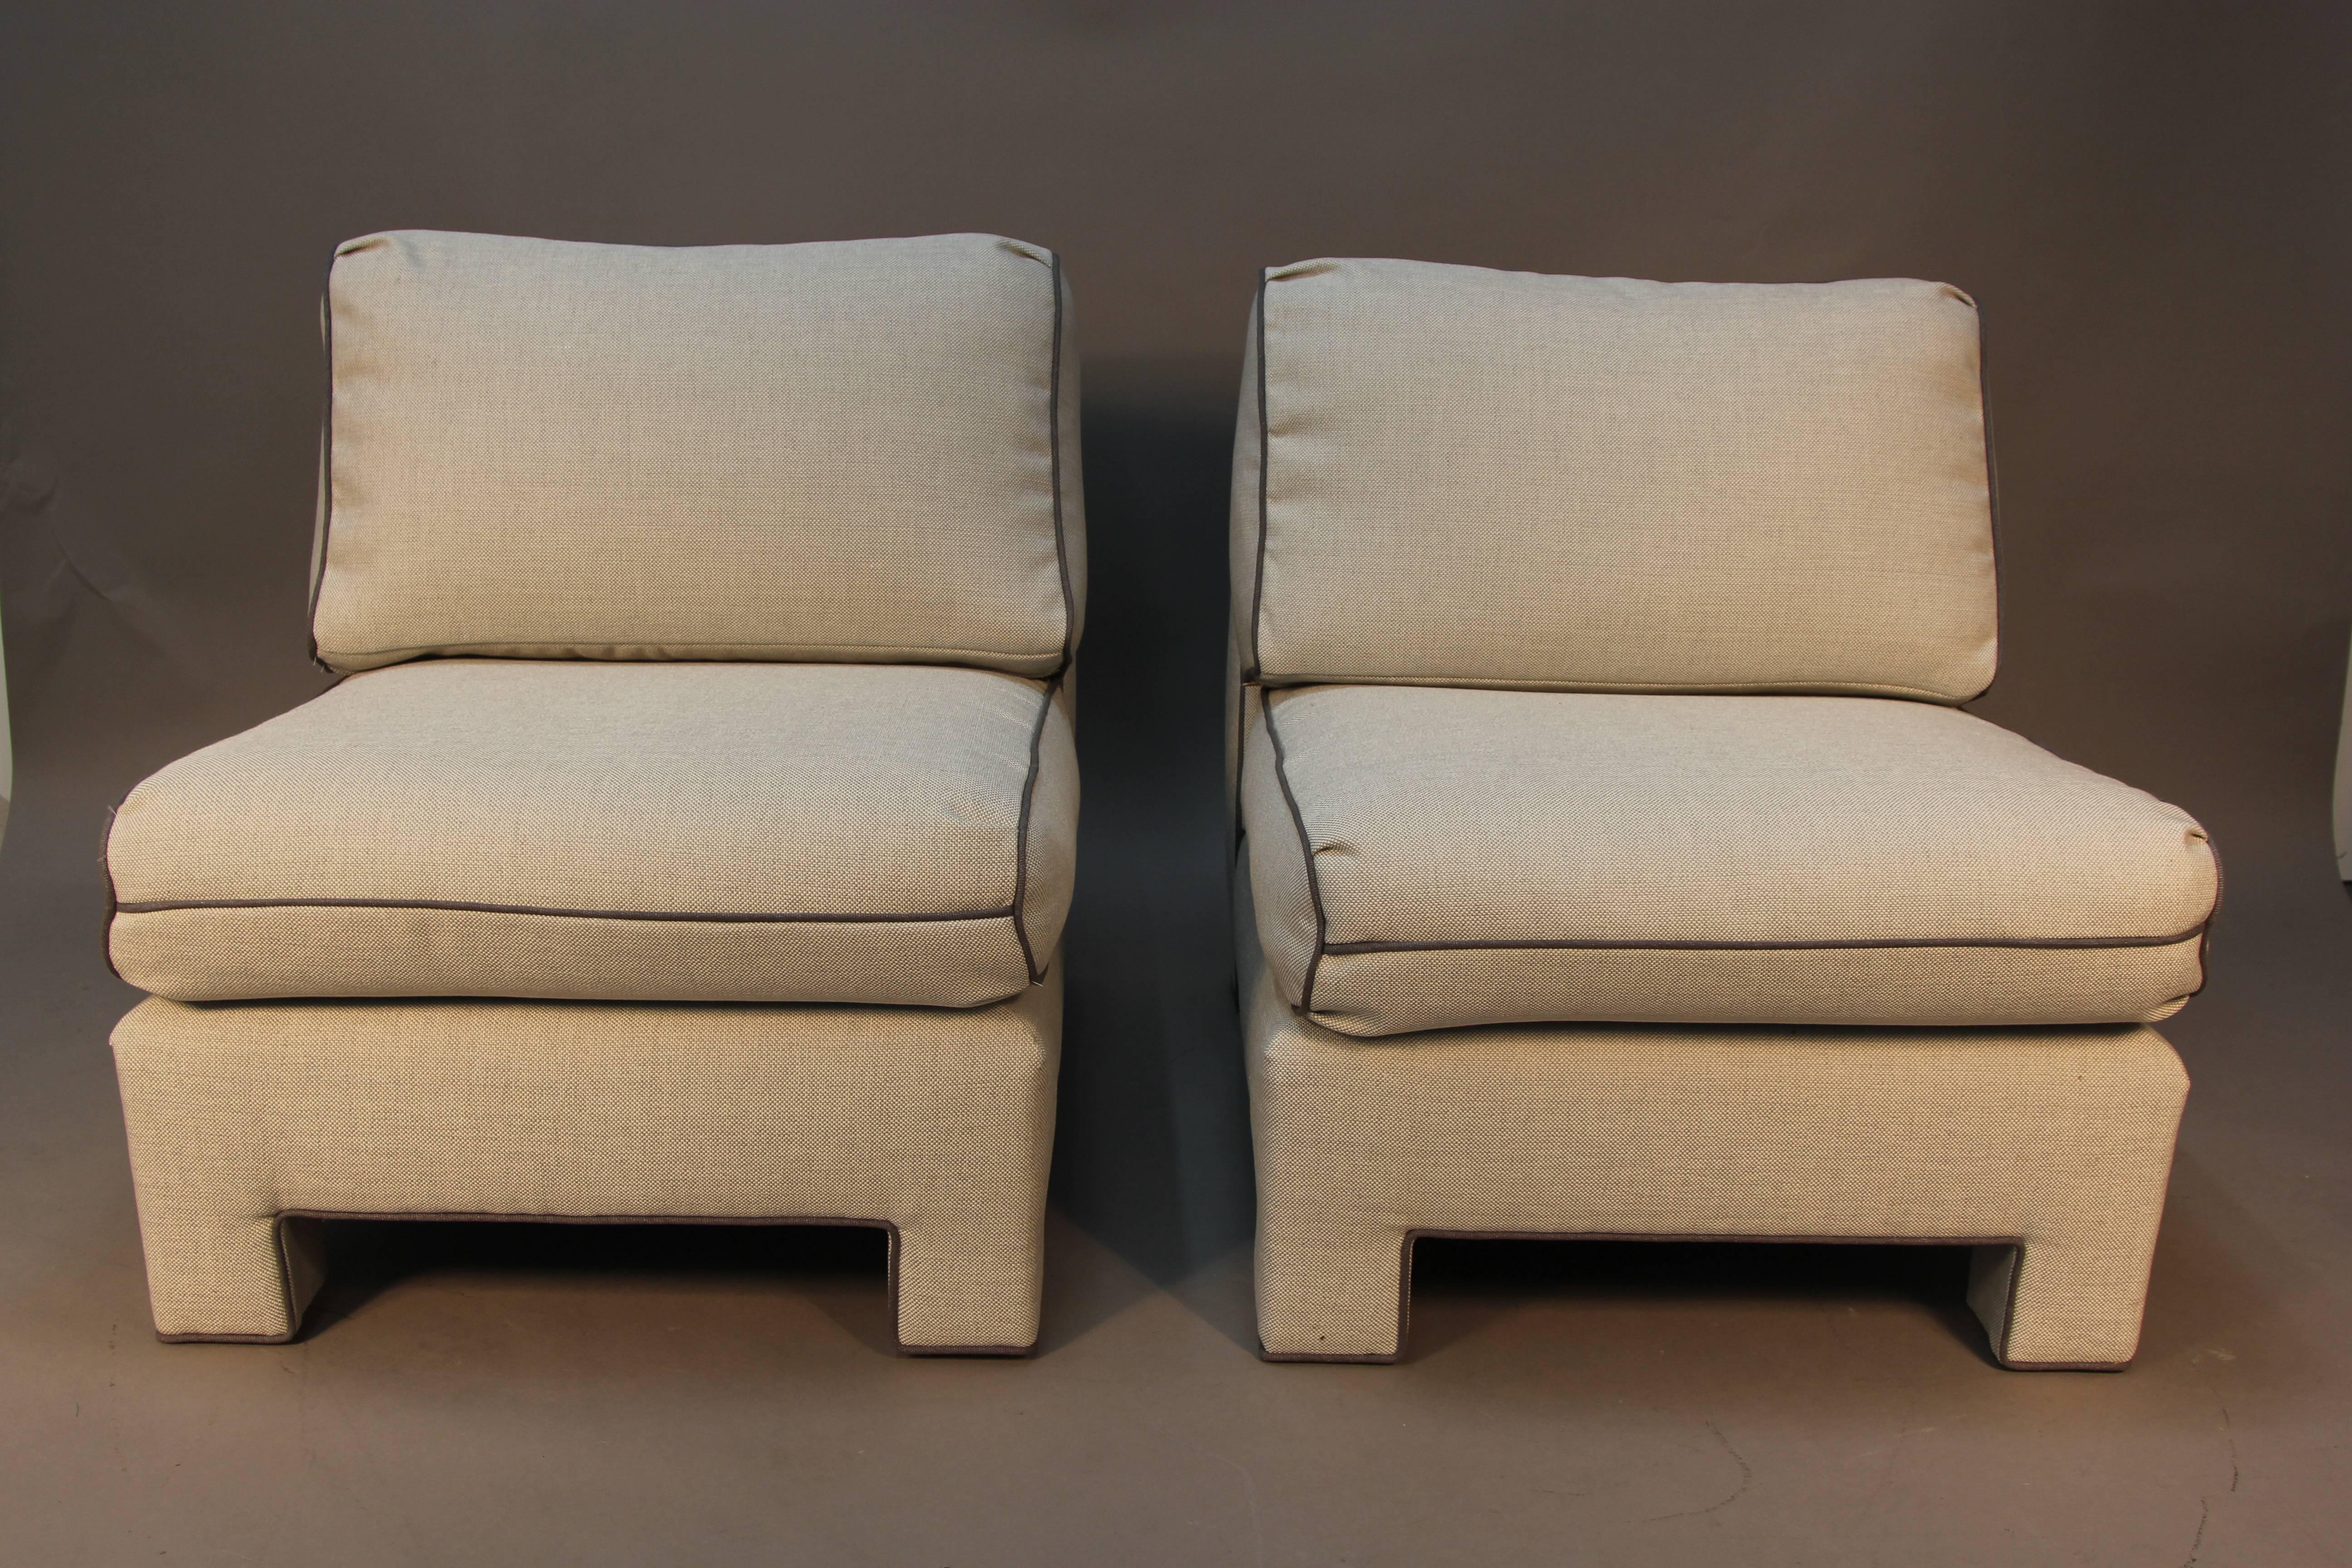 Amazing newly upholstered pair of Billy Baldwin designed slipper chairs. Grey linen with dark grey contrast piping. Very comfortable and stylish pair of slipper lounge chairs.